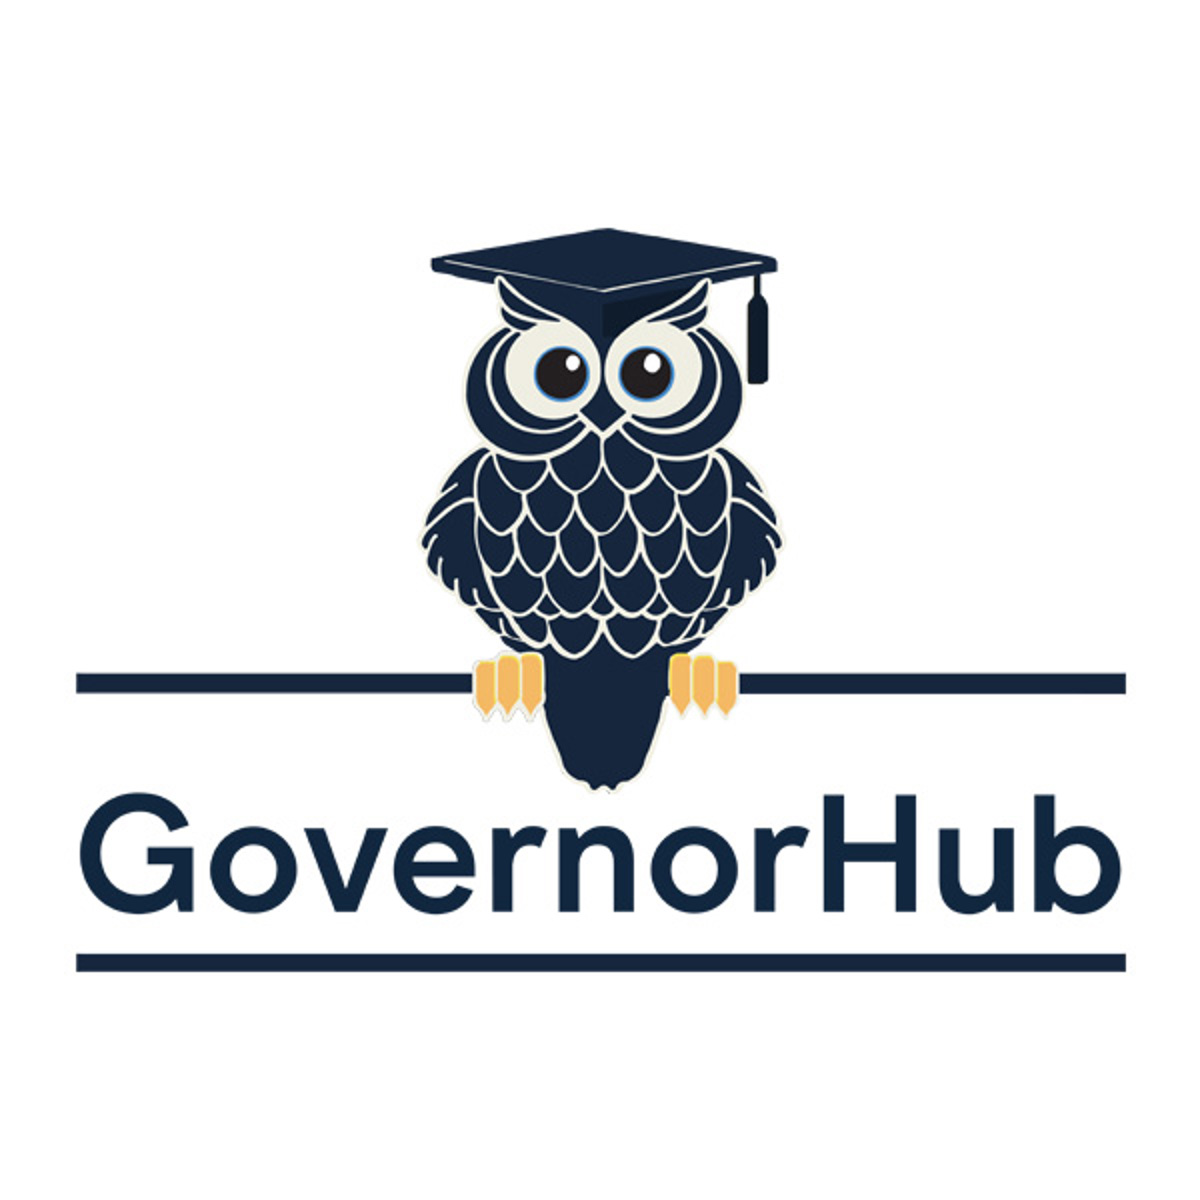 campaigns owl wearing an academic cap